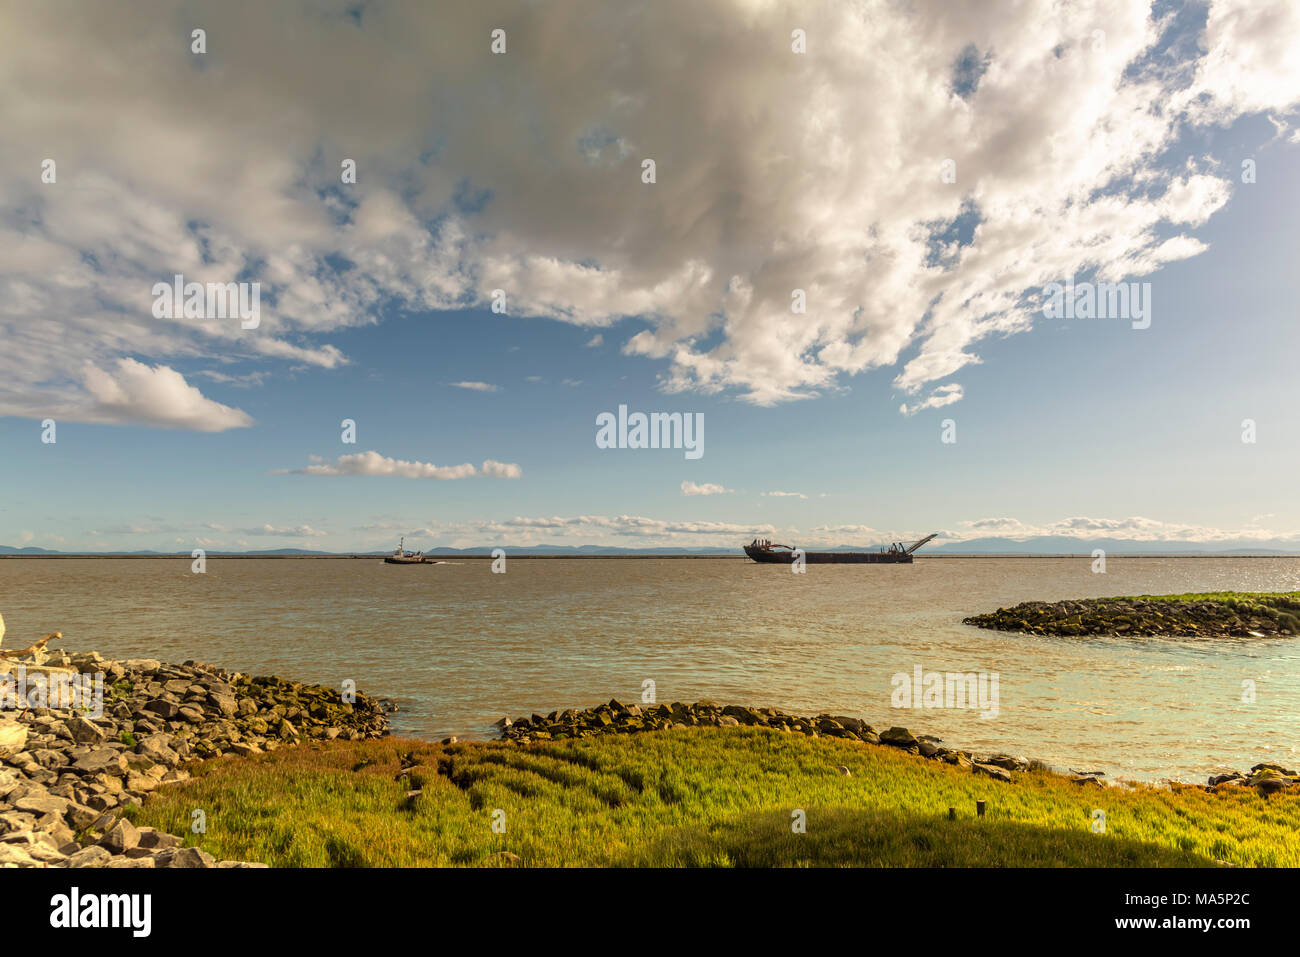 a view from the bank covered with grass and stones on the river with a boat towing a barge over the water, mountains in the background and a huge sky  Stock Photo